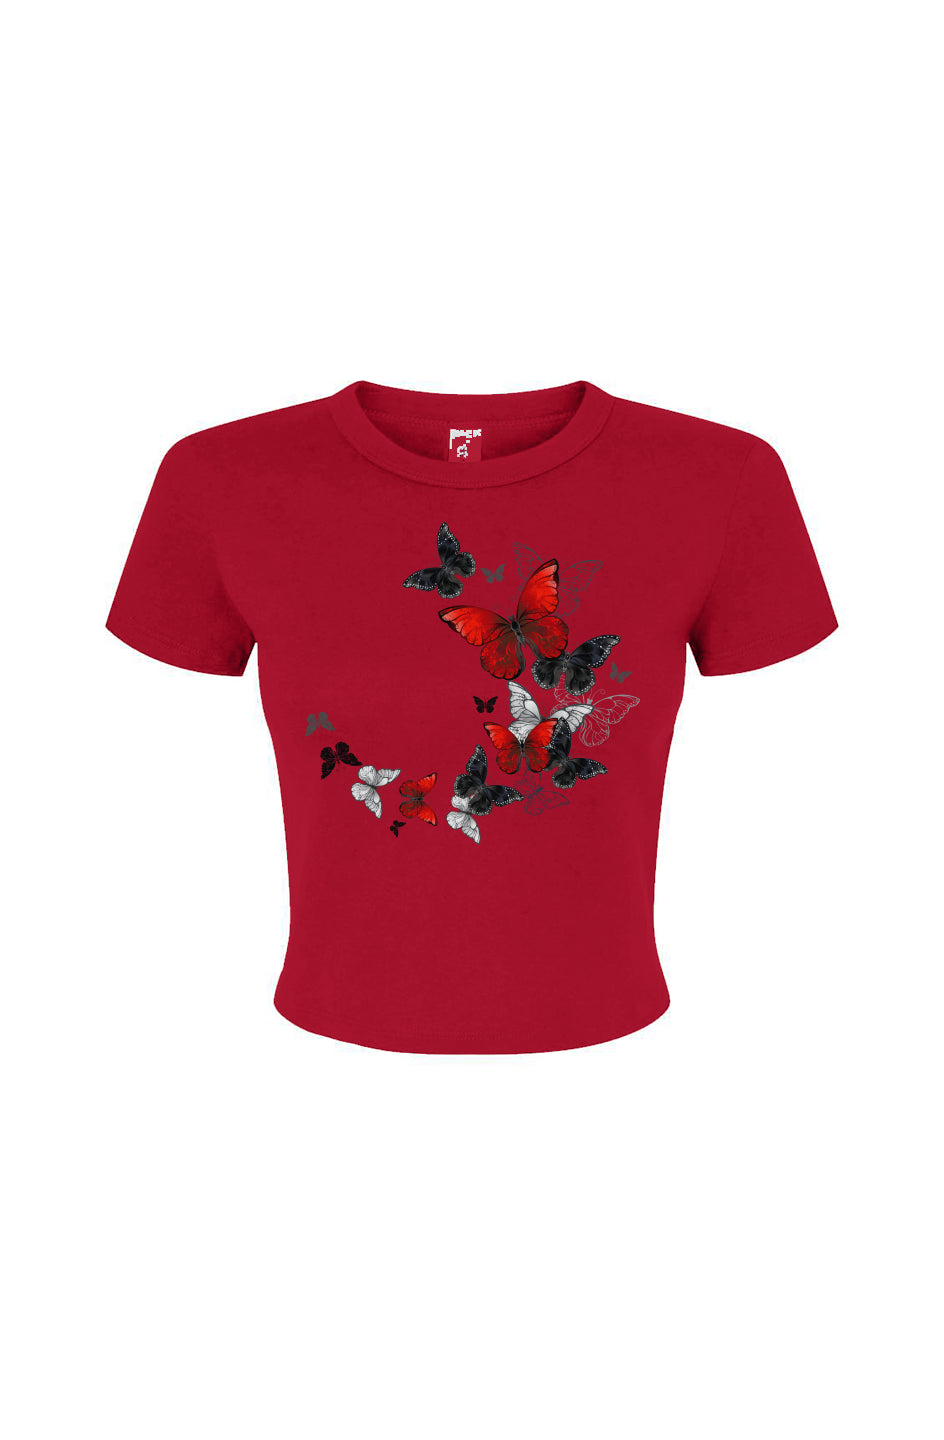 Women's DuGamii "Colorful Butterfly" Rib Red Tee